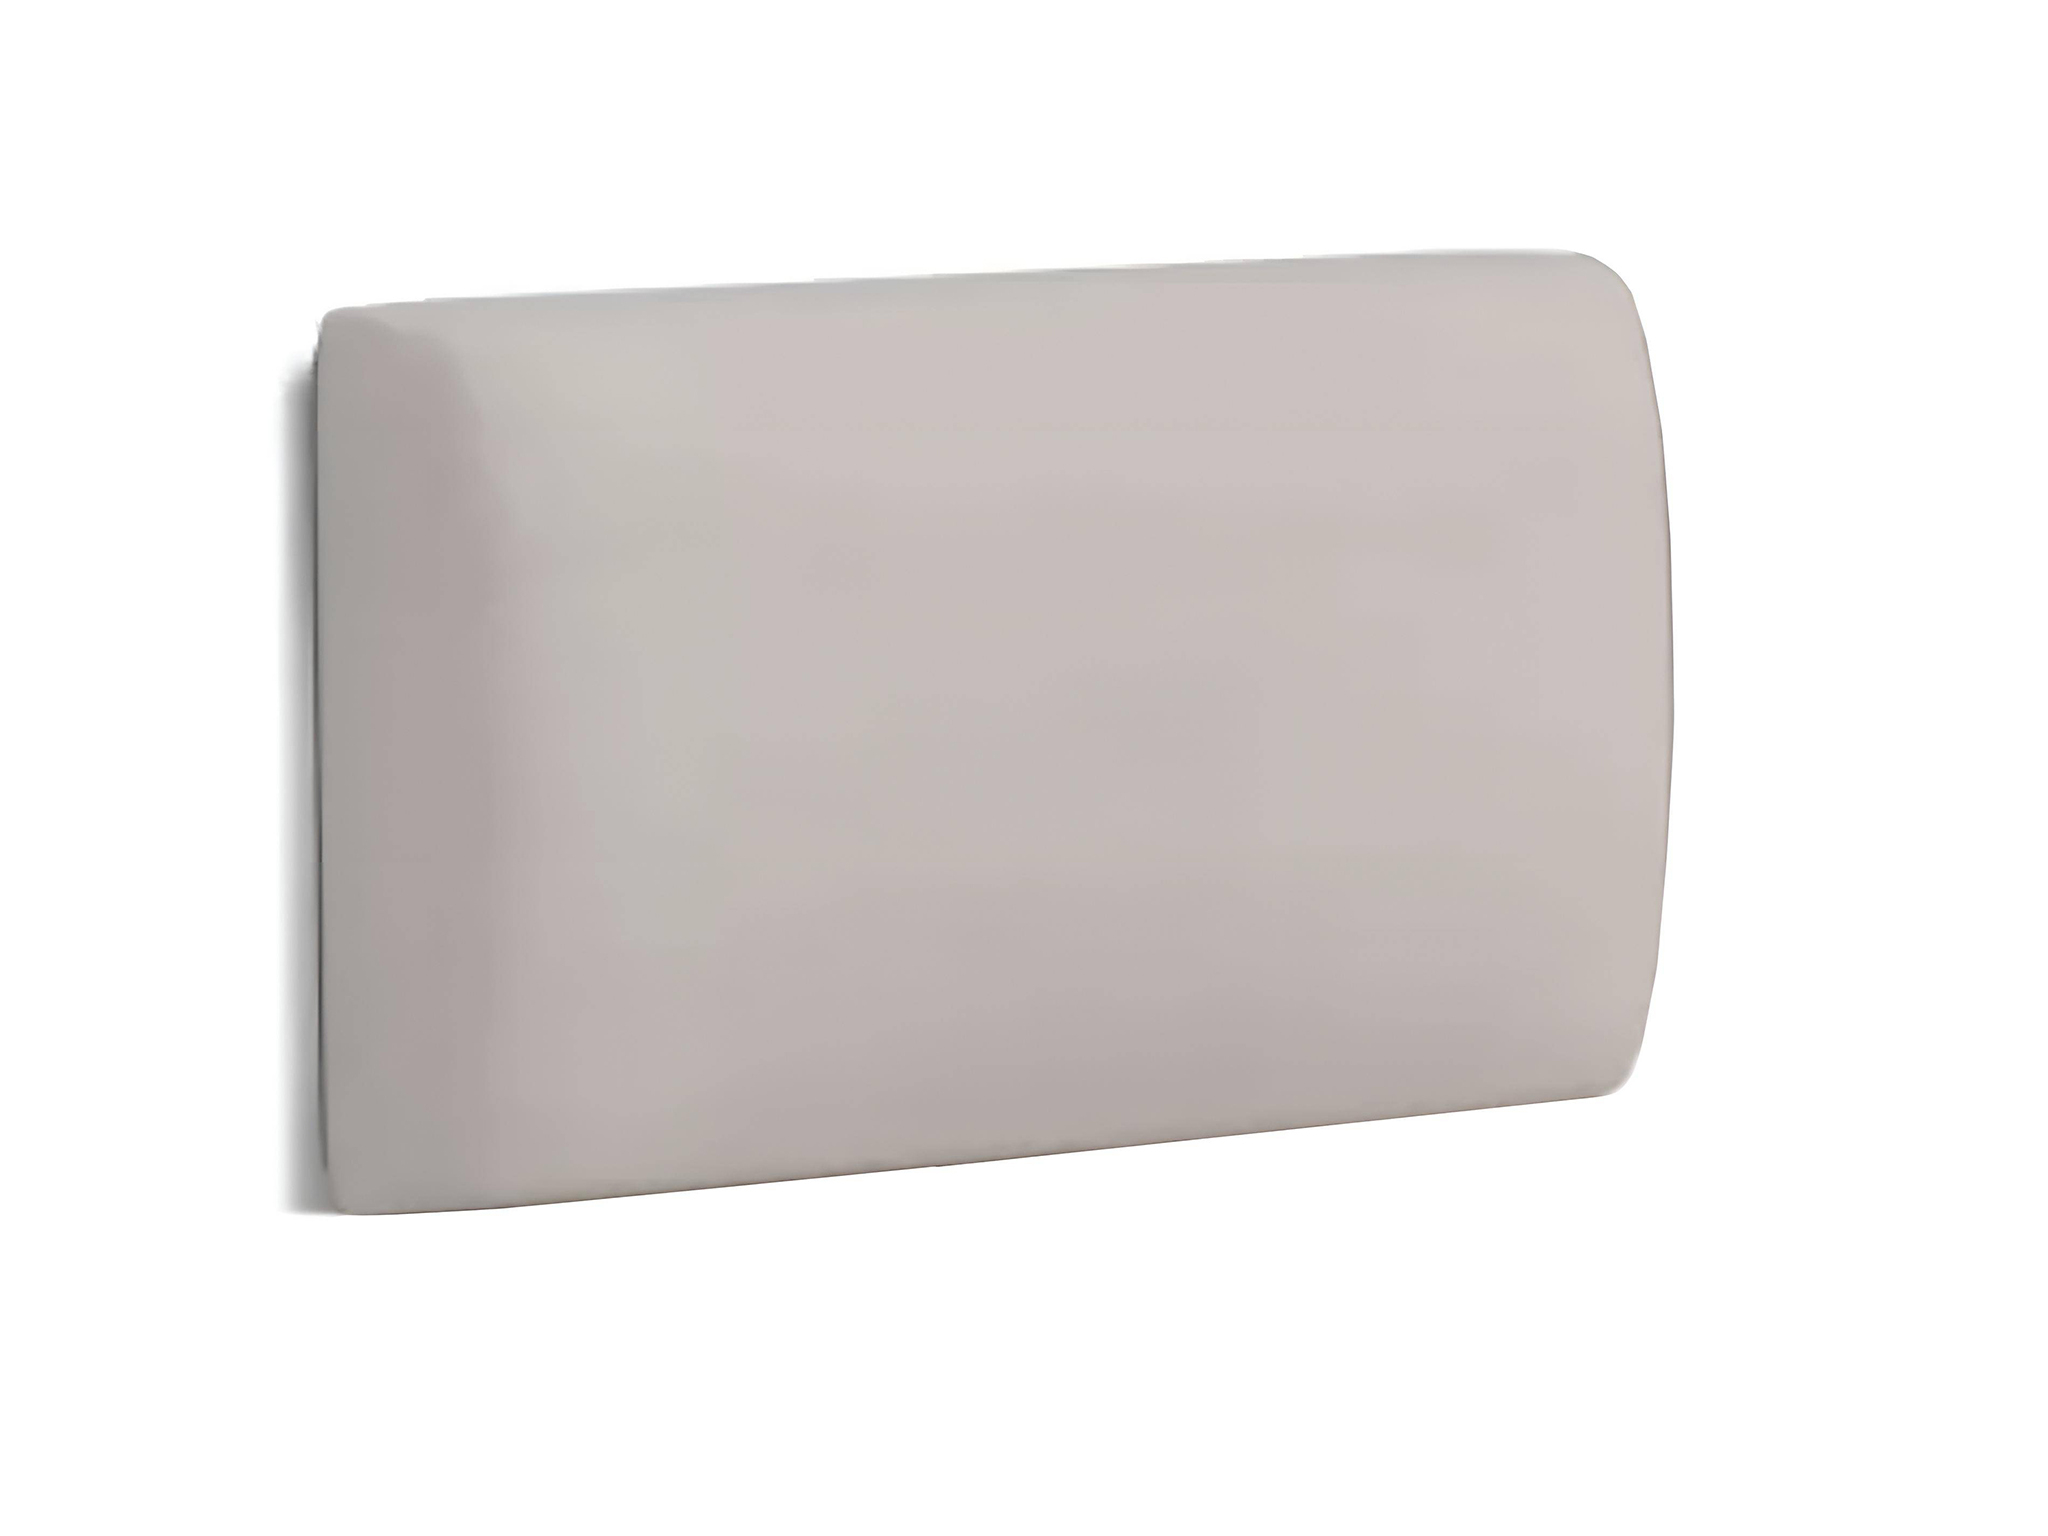 GM Upholstered cream-colored DONY wall panel 30x60